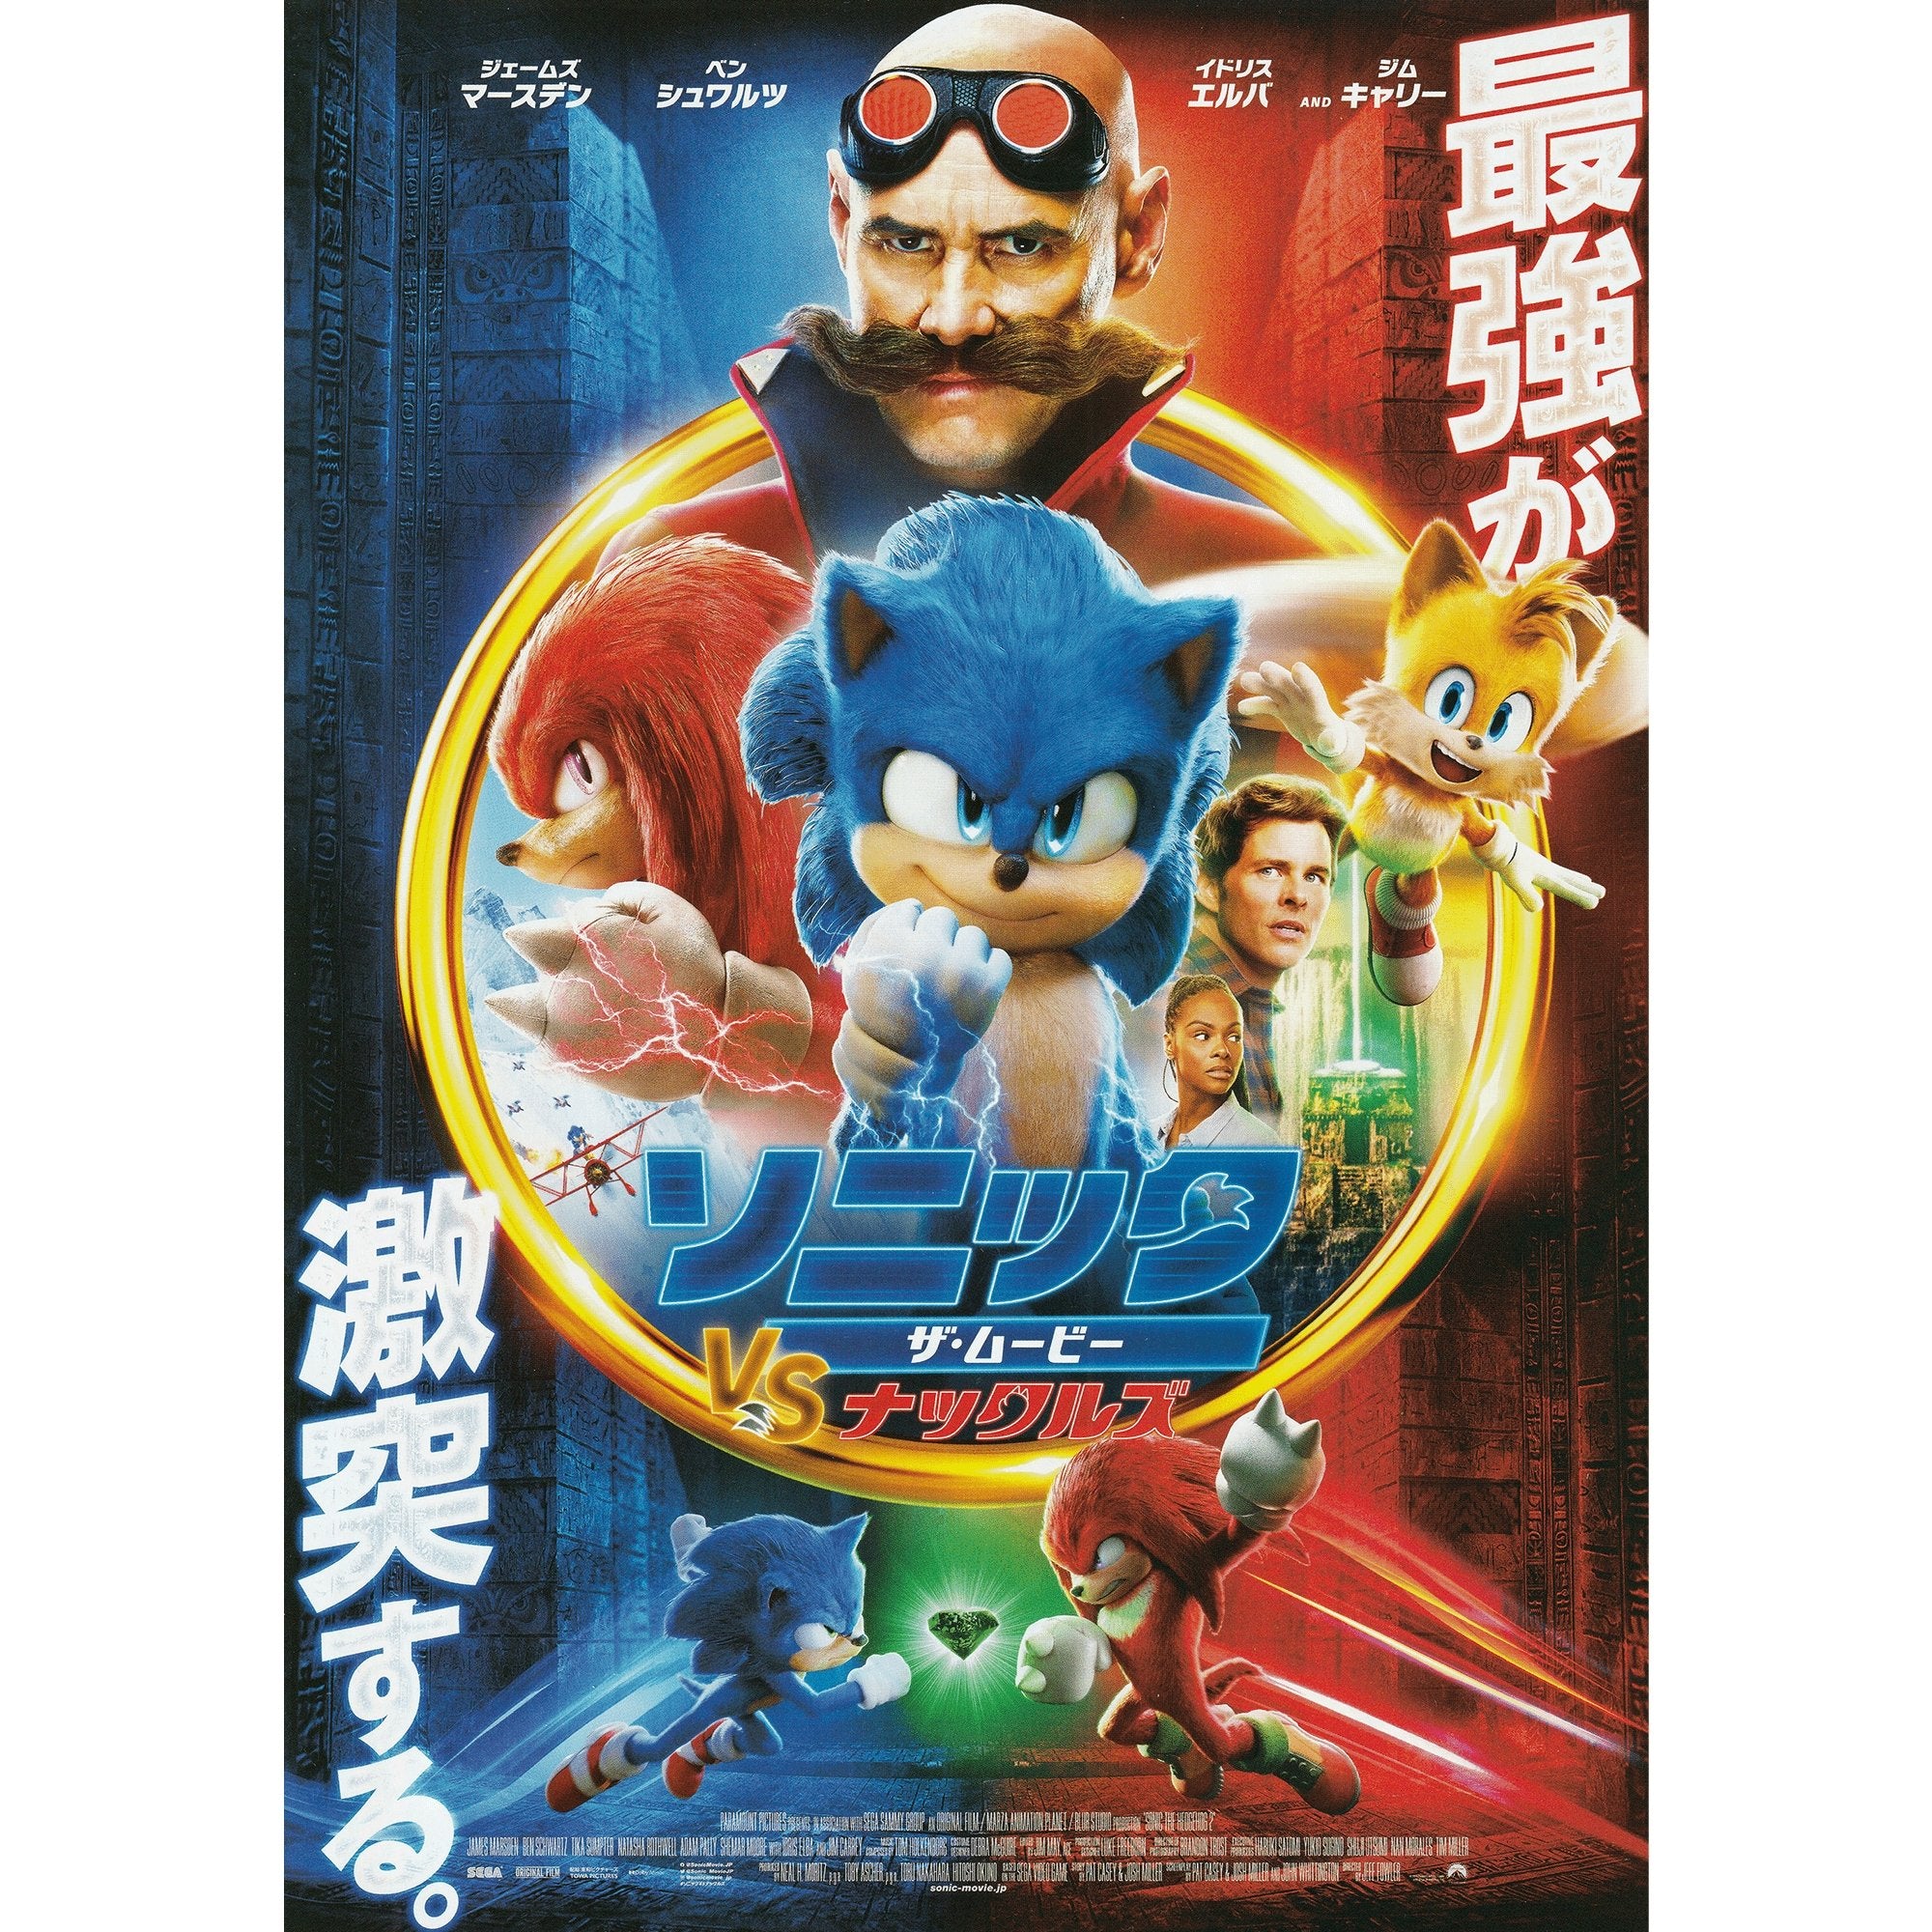 Sonic the Hedgehog 2 Movie Collection (Sonic the Hedgehog / Sonic